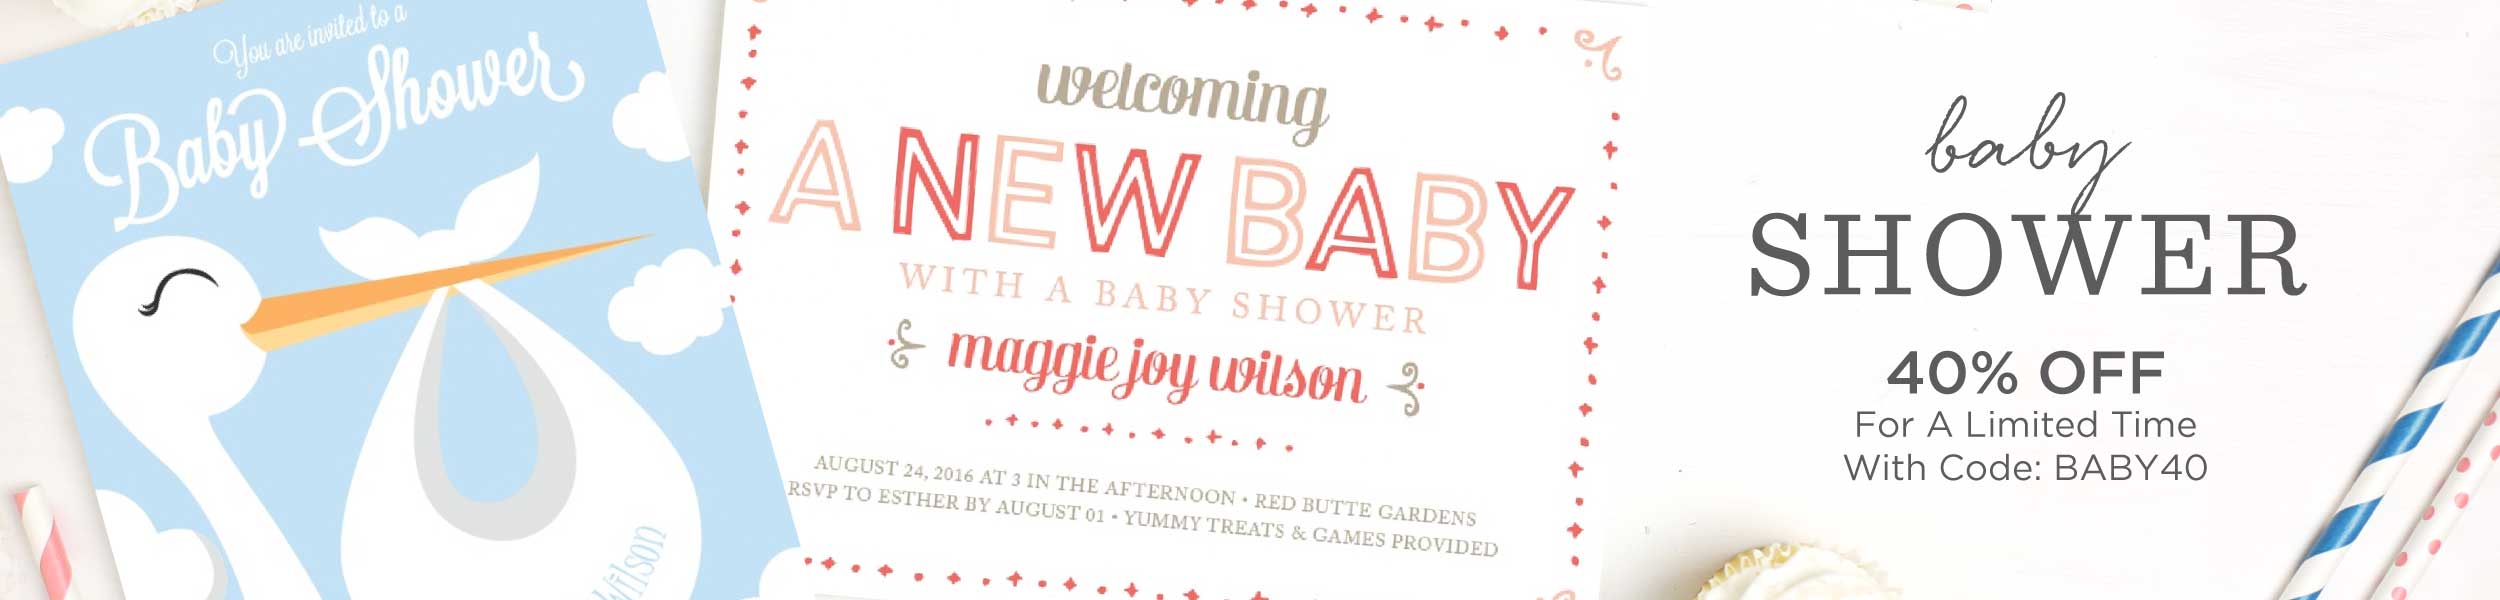 Full Size of Baby Shower:unique Baby Shower Themes Homemade Baby Shower Decorations Baby Shower Invitations Baby Girl Themes Baby Shower Card Message Ideas Zazzle Invitations Baby Girl Themes For Baby Shower Oriental Trading Baby Shower